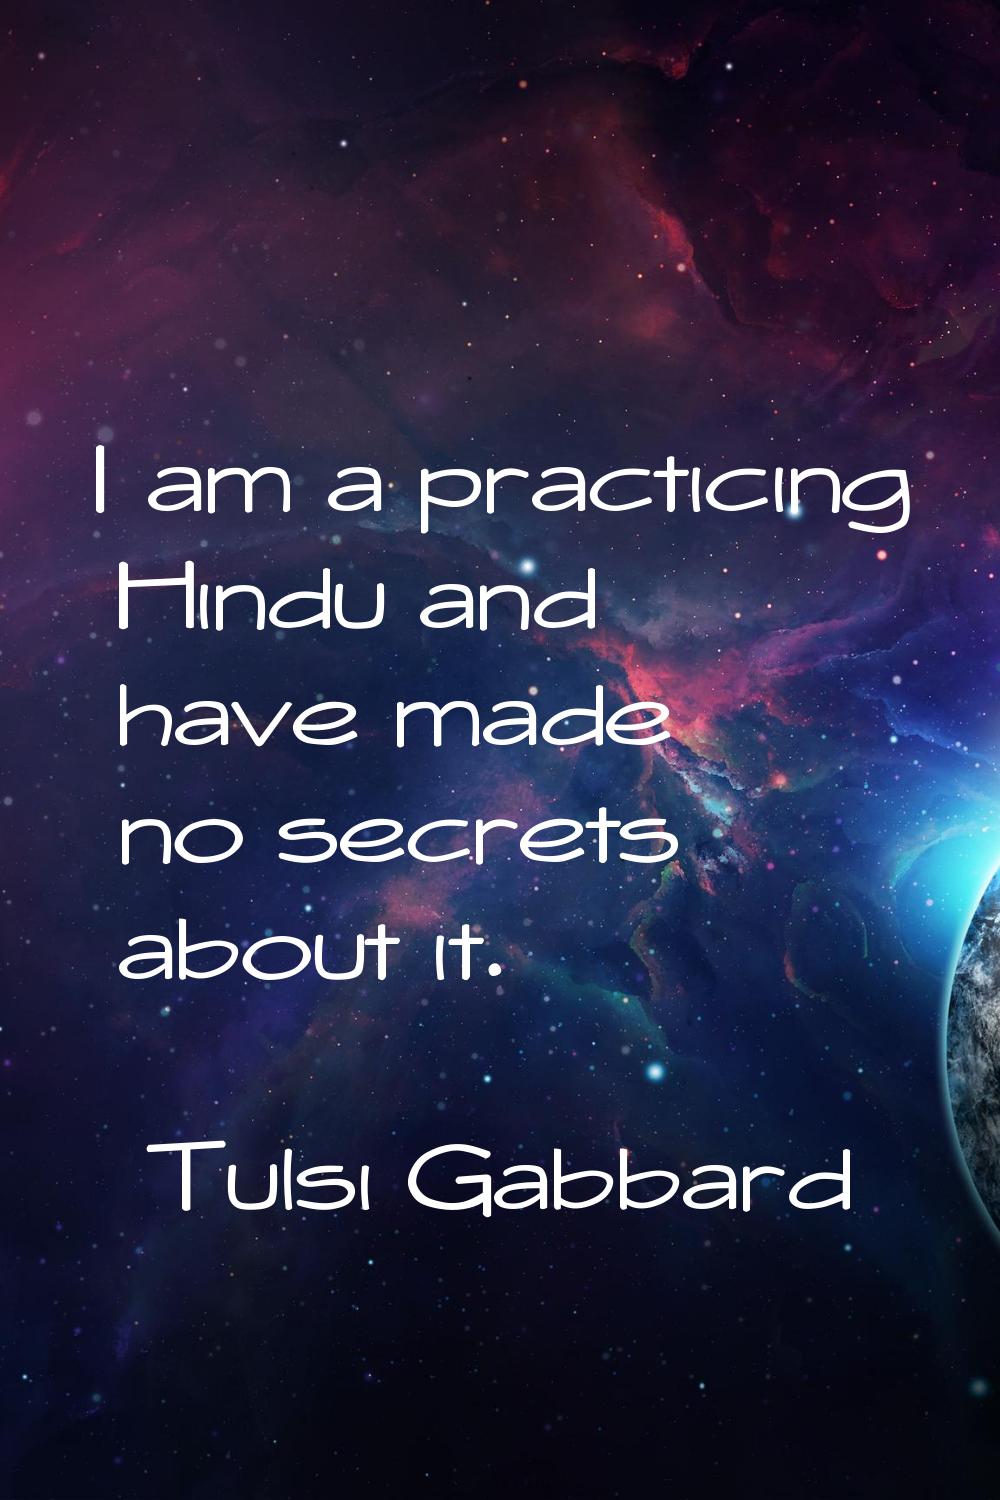 I am a practicing Hindu and have made no secrets about it.